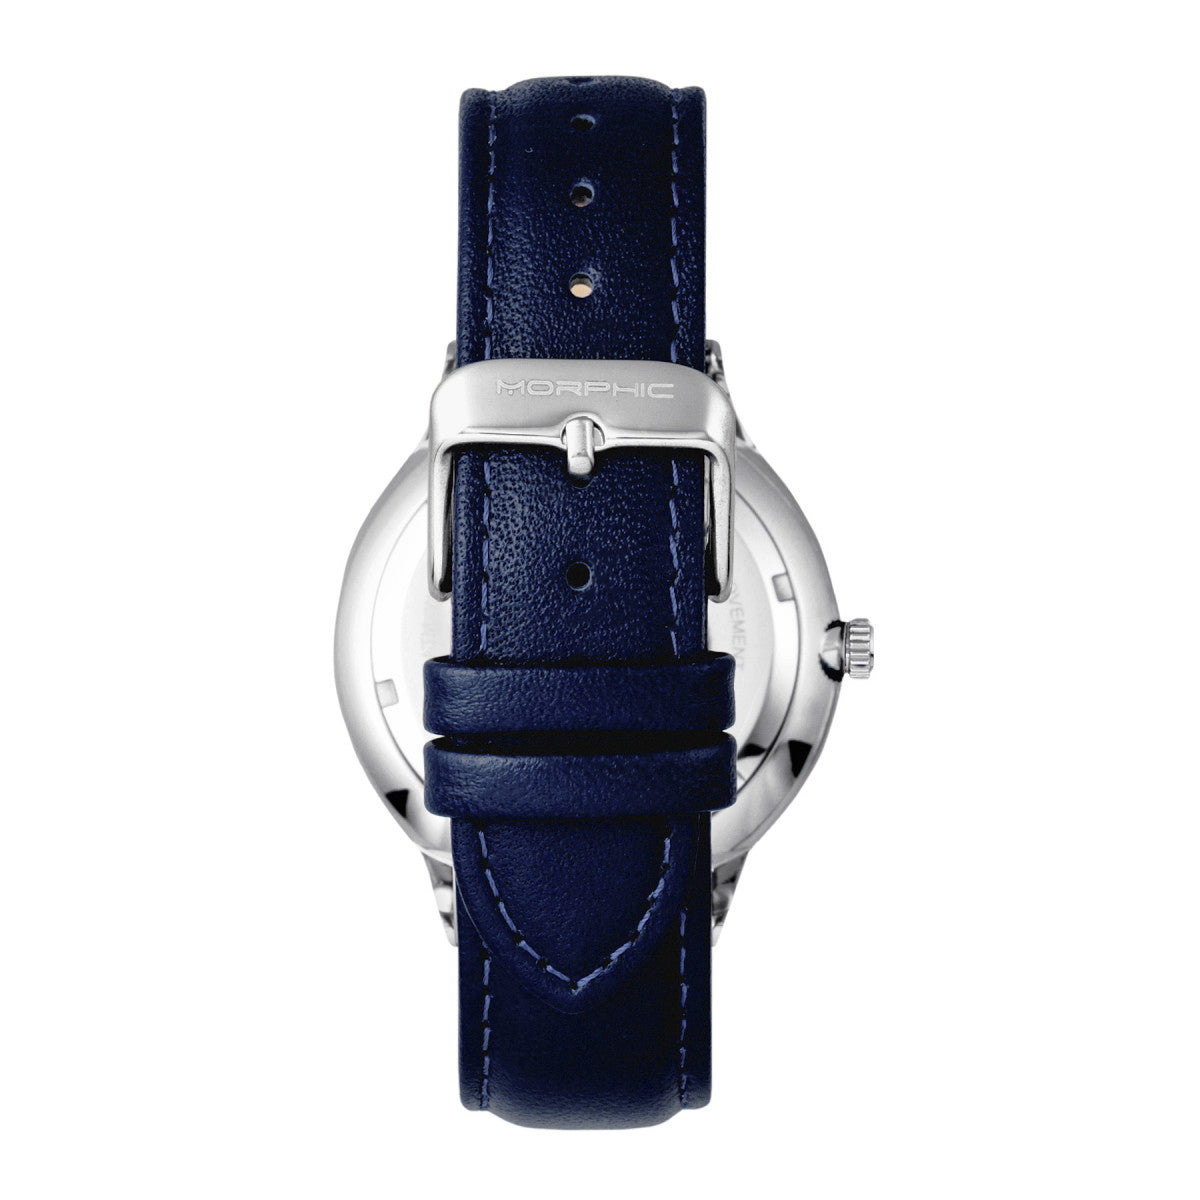 Morphic M65 Series Leather-Band Watch w/Day/Date - Blue - MPH6506